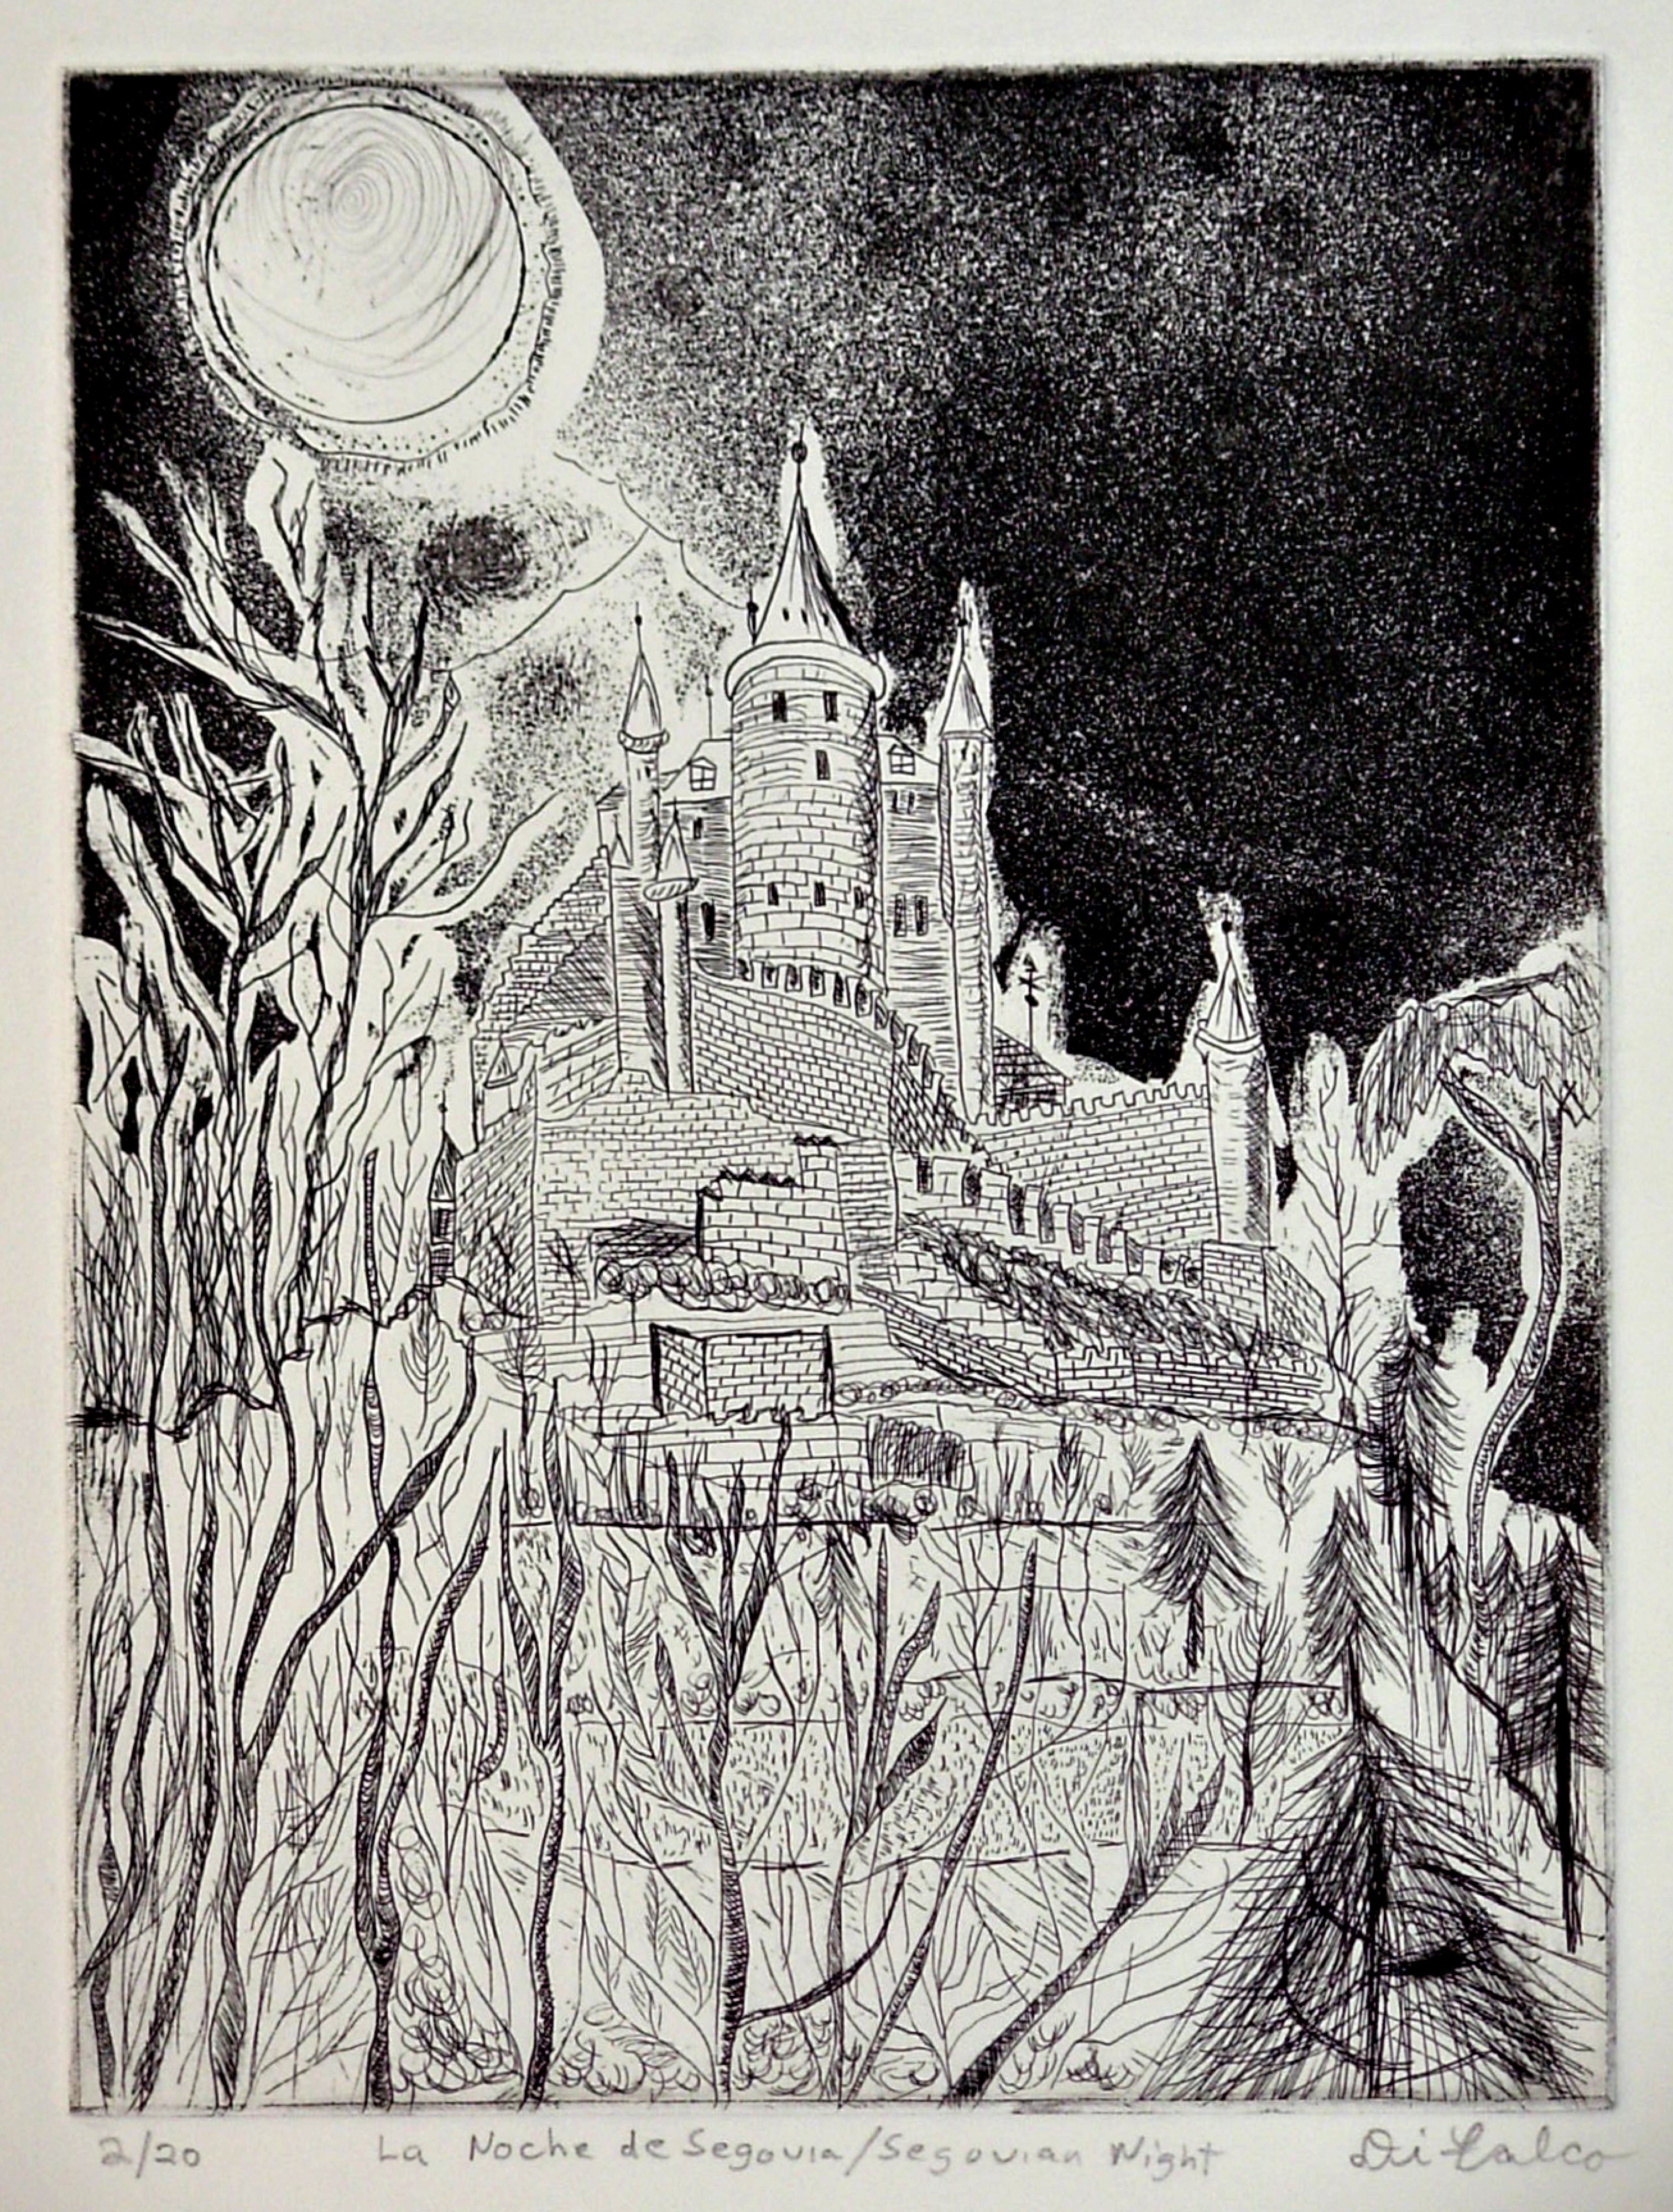 Jerry  Di Falco: 'Noche de Segovia SEGOVIAN NIGHT', 2009 Etching, Landmarks. The work was hand printed and published by the artist at The Center for Works on Paper in Philadelphia, Pennsylvania. Please note that this etching is shipped to the collector without a frame or mat. This keeps the price low and allows the collector personal choice in matt selection and ...